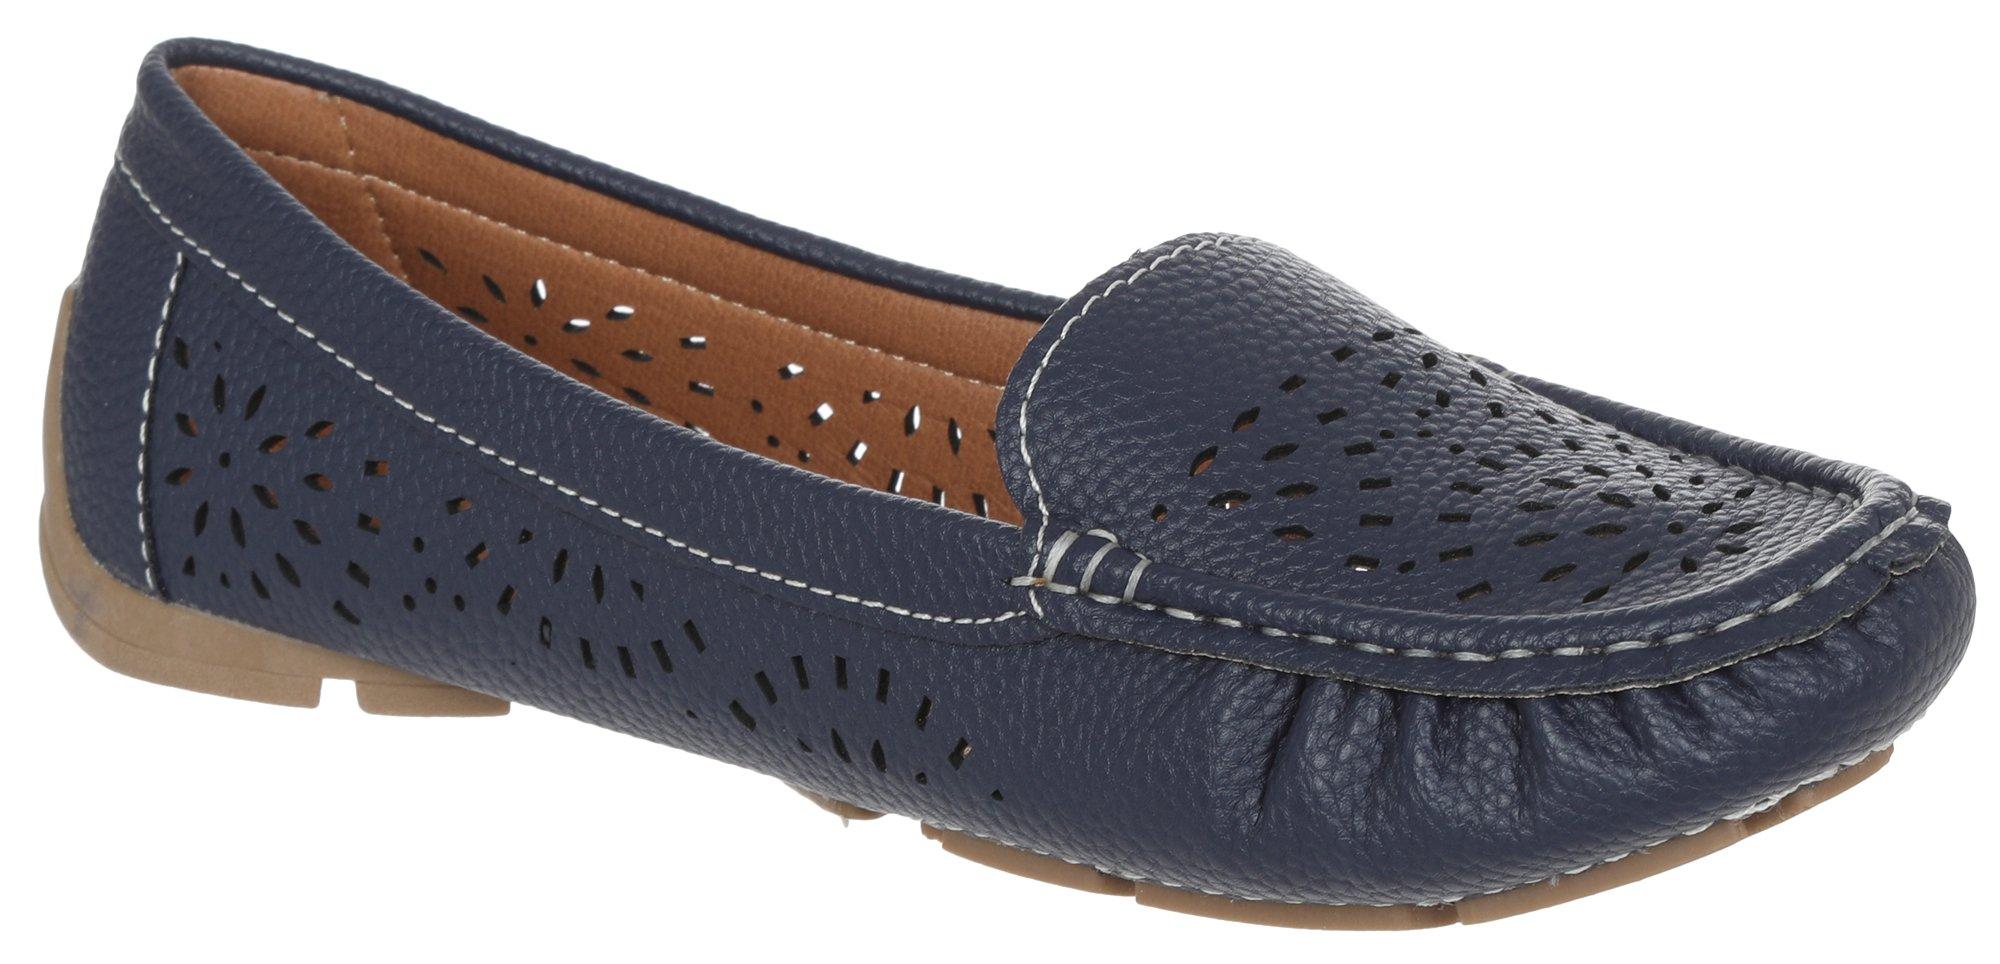 Women's Casual Faux Leather Perforated Moccasins